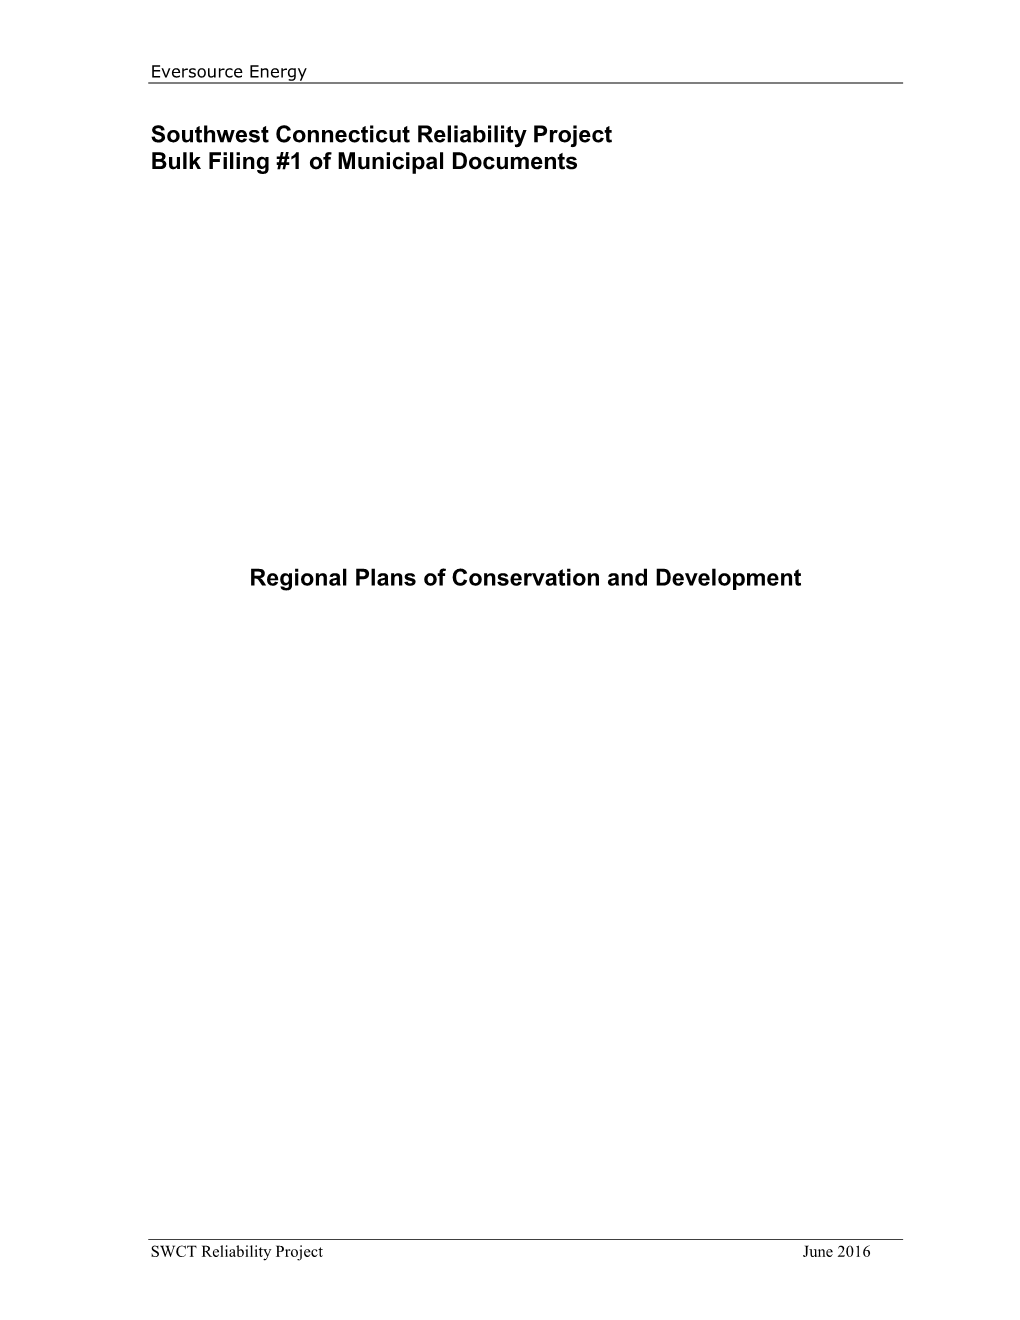 Regional Plan of Conservation and Development